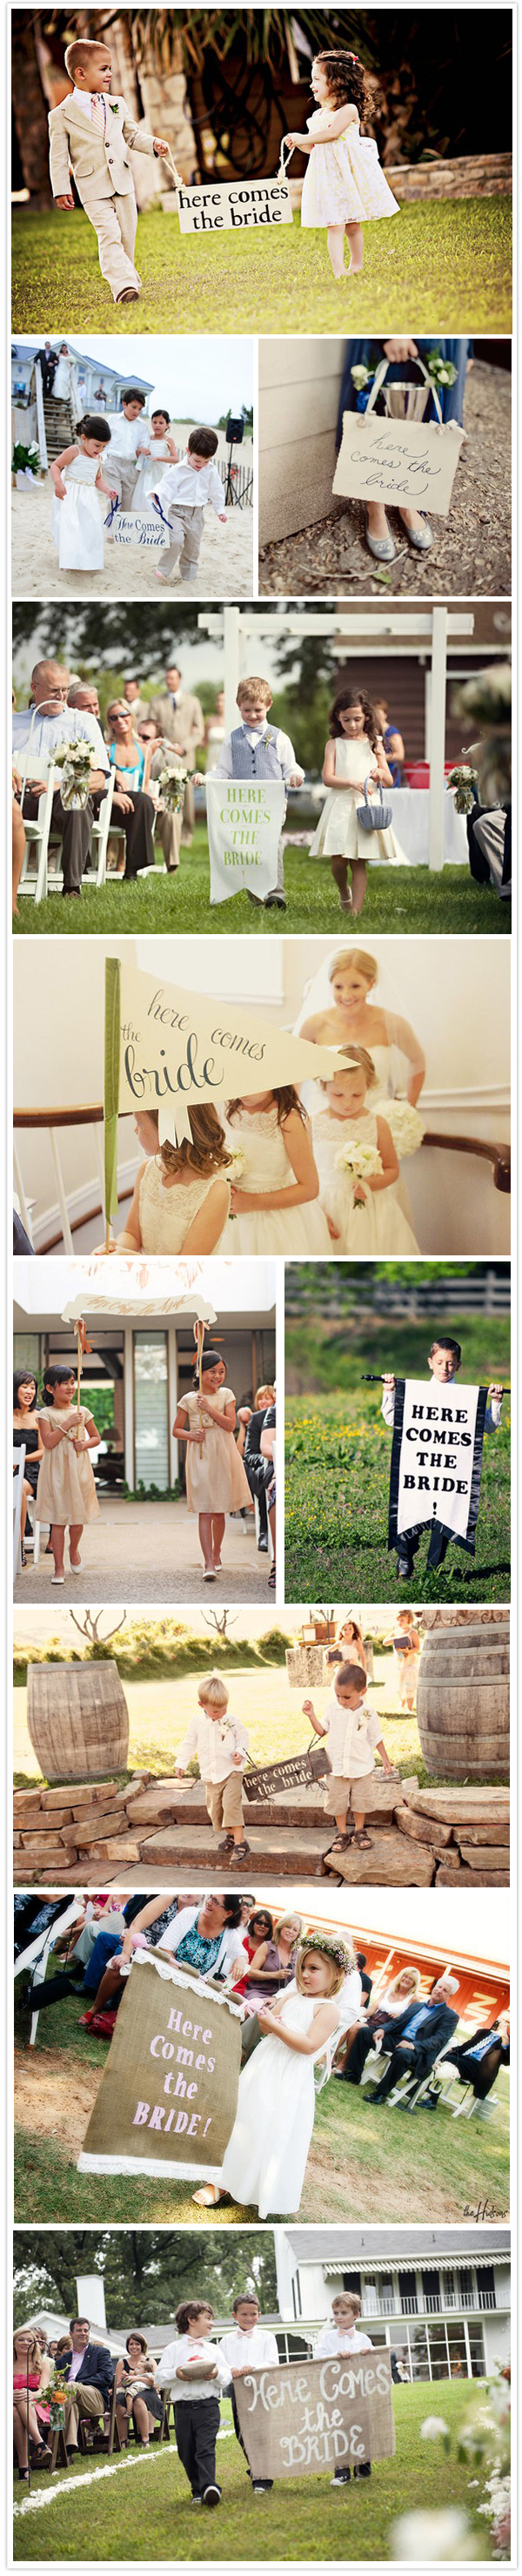 Here comes the bride wedding signs